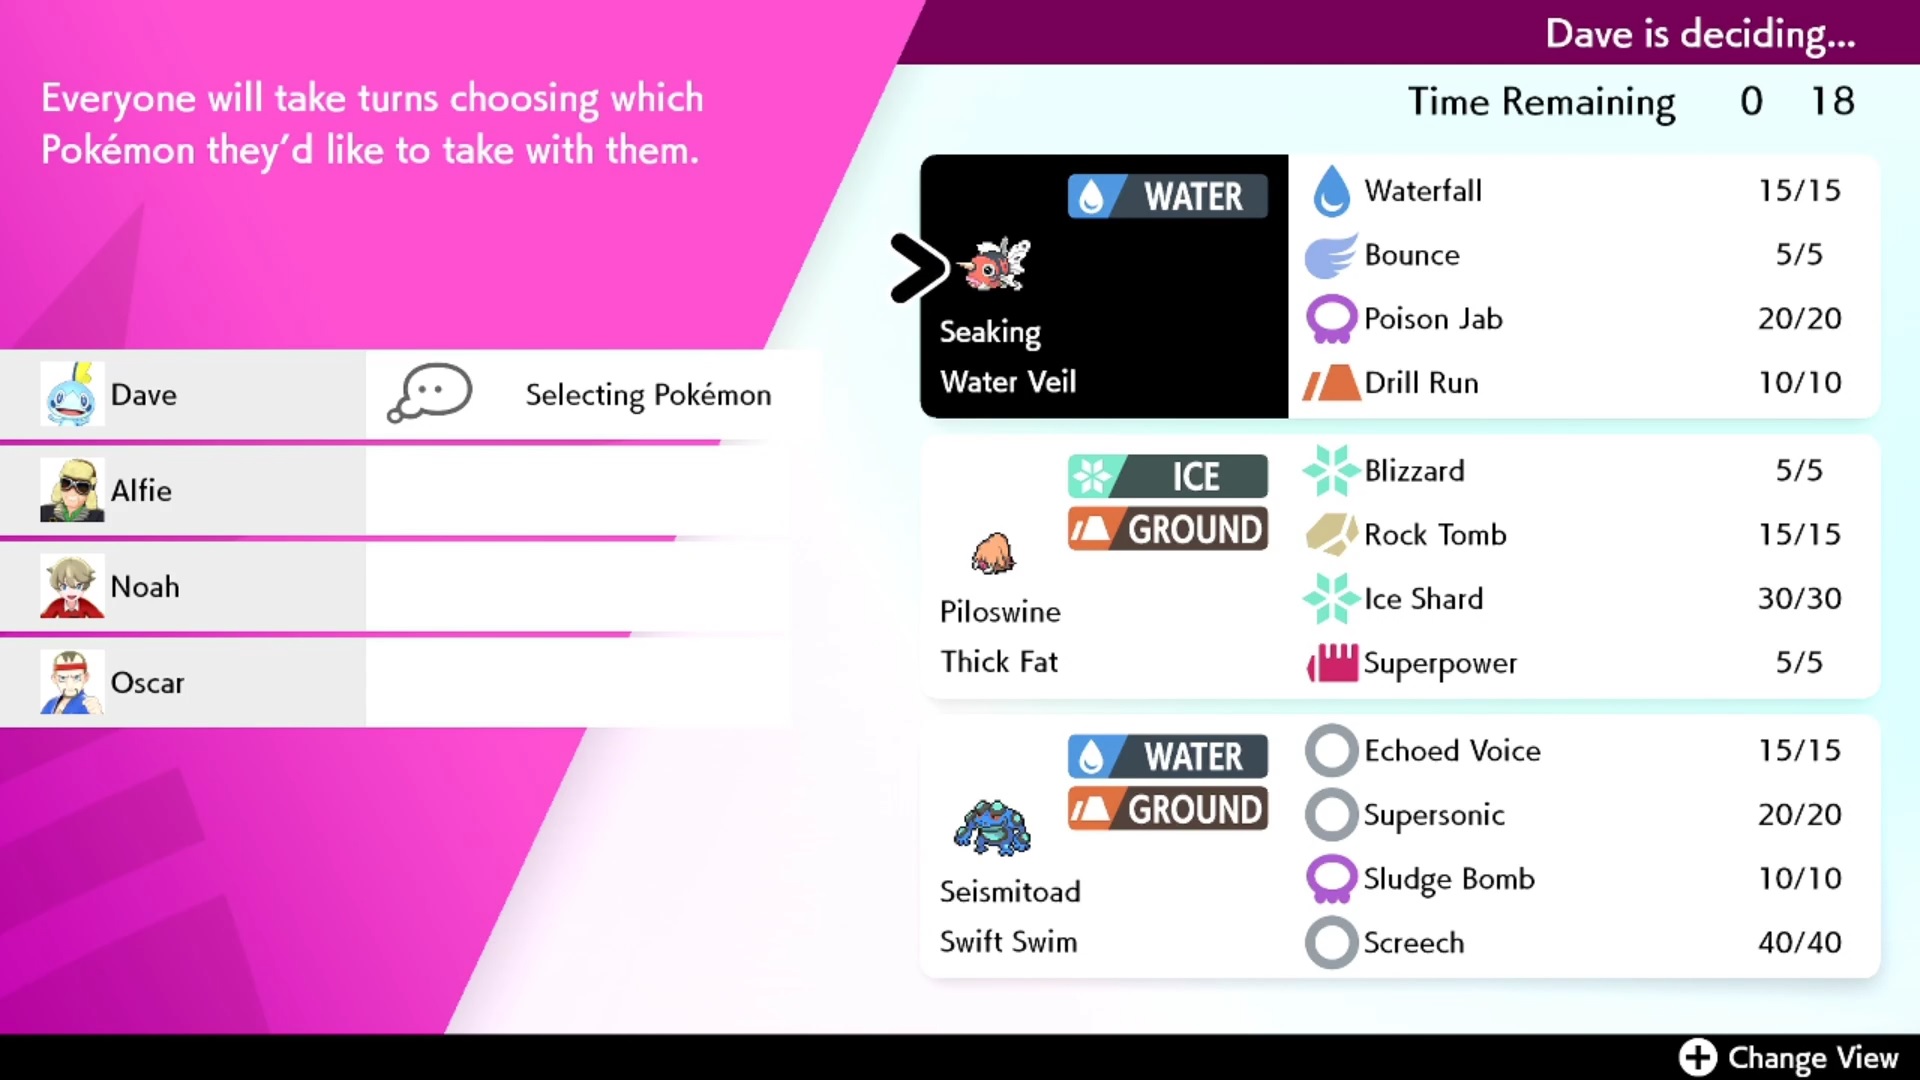 Pokémon Sword and Shield Max Lairs Dynamax Adventures: The player is selecting a Pokémon from three choices for the Dynamax Adventure. Three AI trainers are waiting to choose.